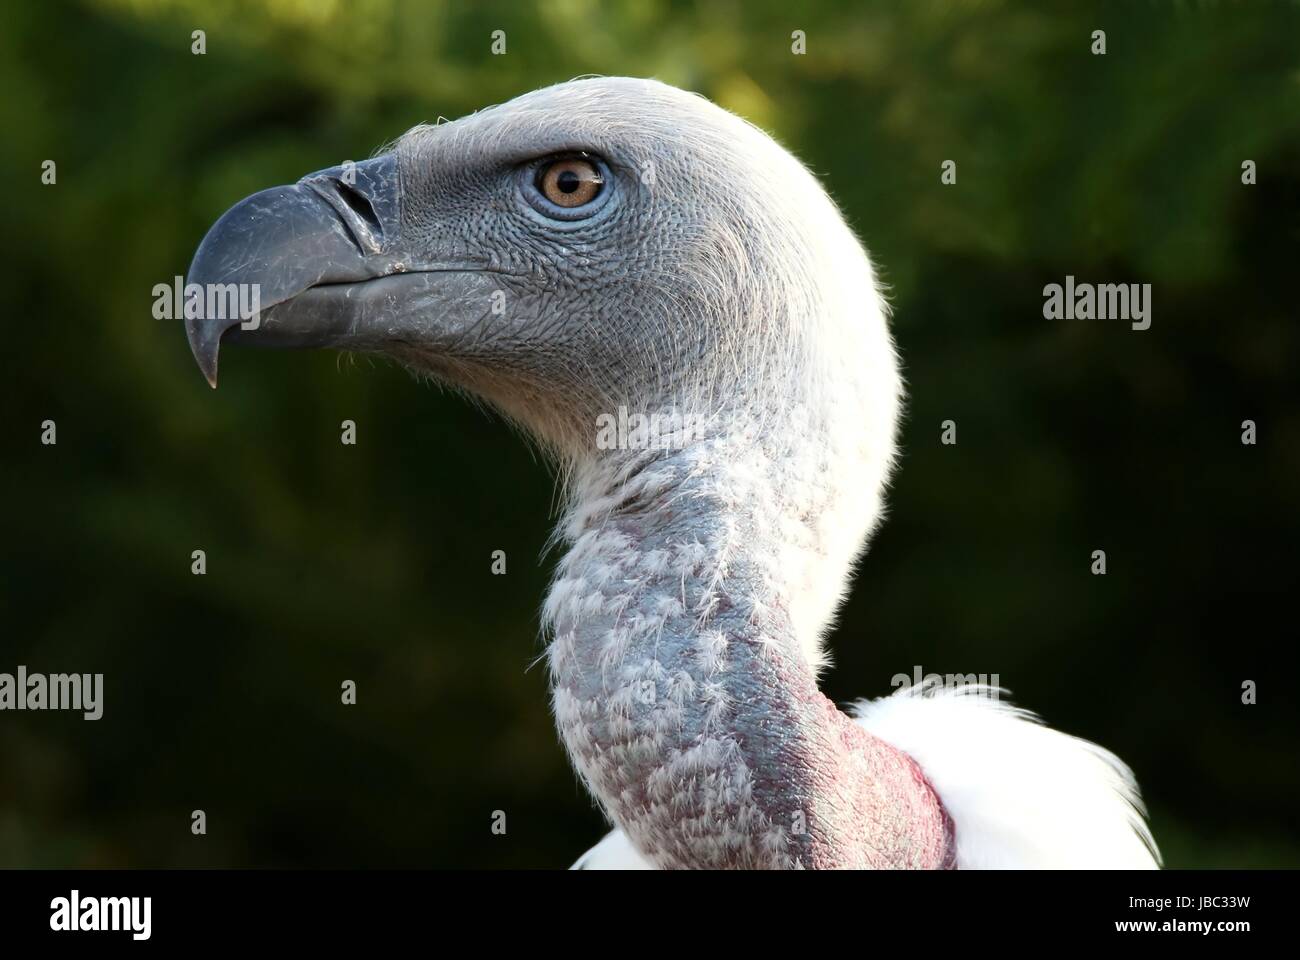 Portrait of a Griffon's vulture bird with a large hooked beak Stock ...